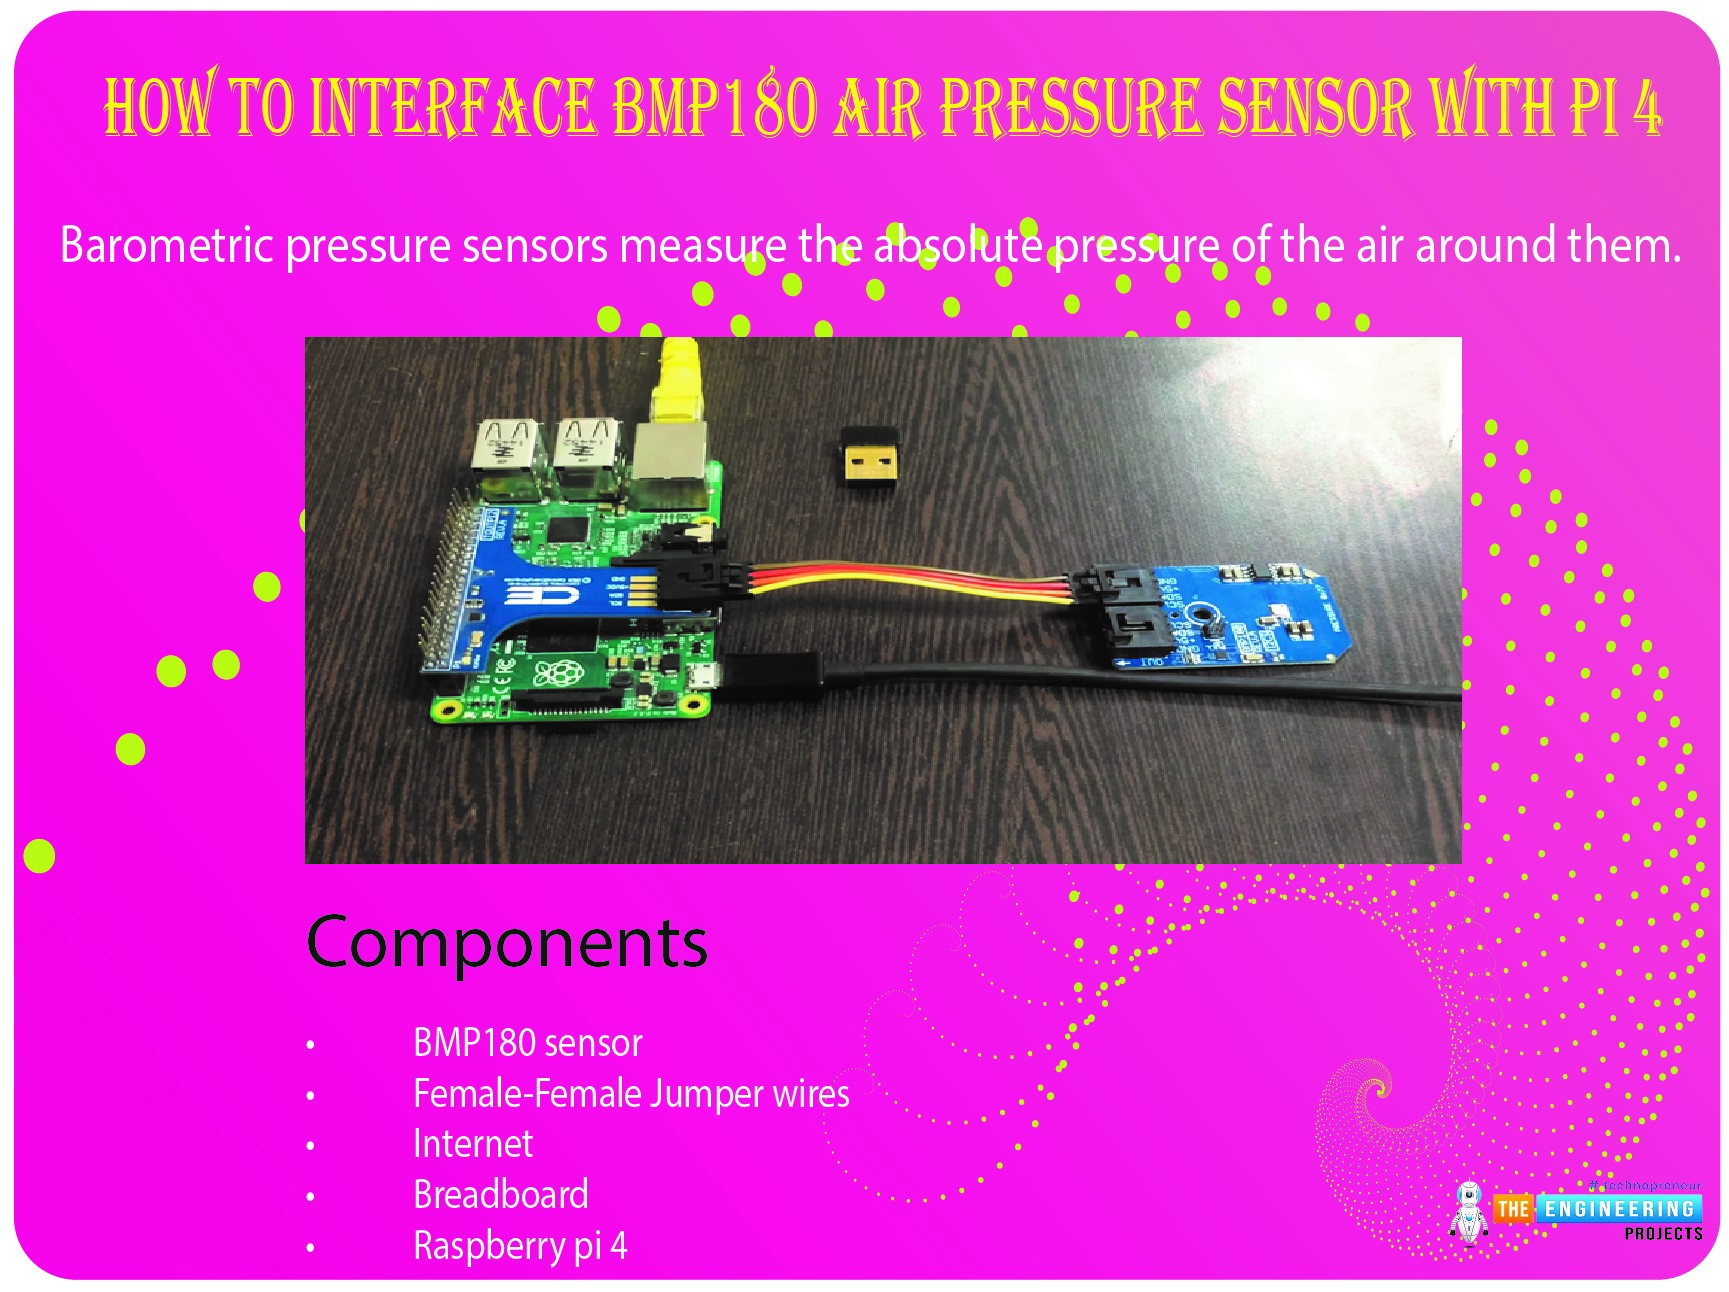 How to Interface BMP180 air pressure sensor with pi 4, bmp180 raspberry pi 4, raspberry pi 4 bmp180, bmp180 rpi4, rpi4 bmp180, air pressure sensor with raspberry pi 4, raspberry pi 4 air pressure sensor bmp180